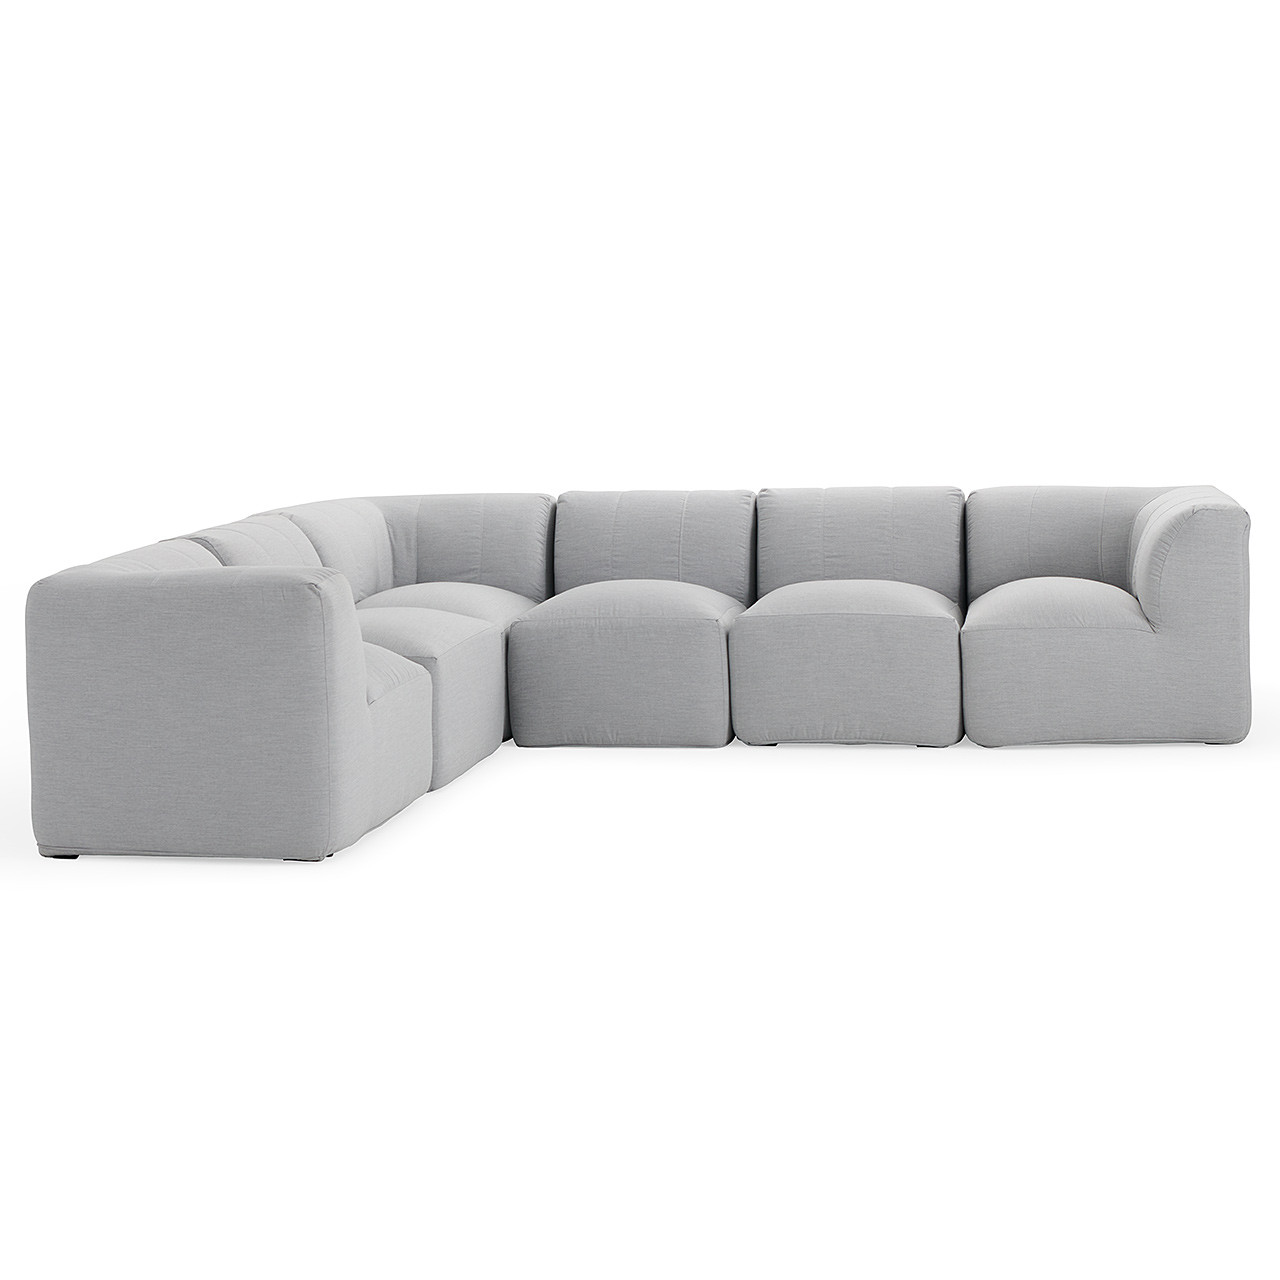 Napa Upholstered 6 Piece Sectional